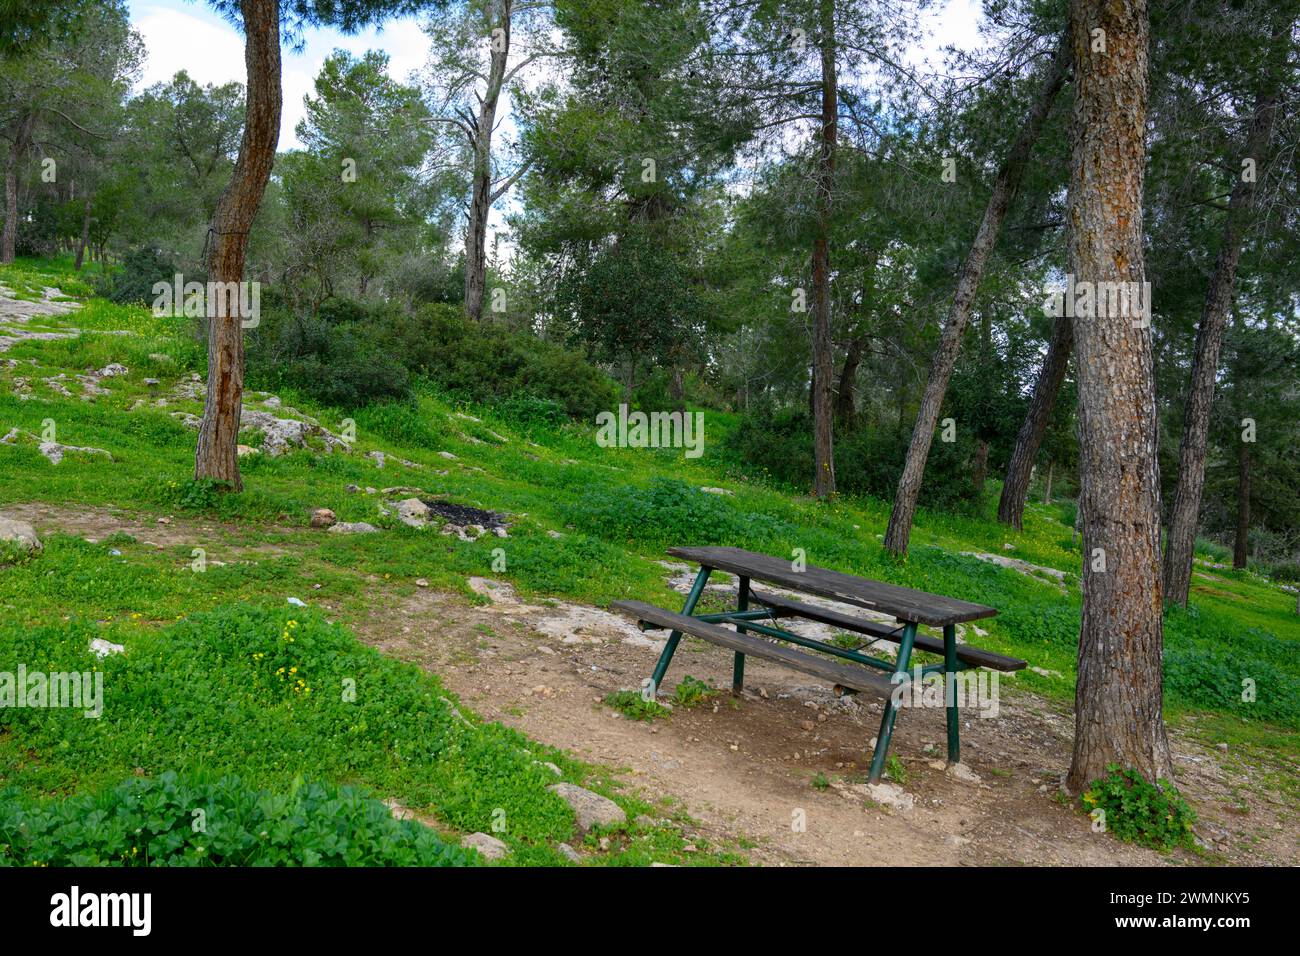 wooden picnic table in a pine forest Photographed in the Jerusalem Hills, near Beit Shemesh, Israel in February Stock Photo